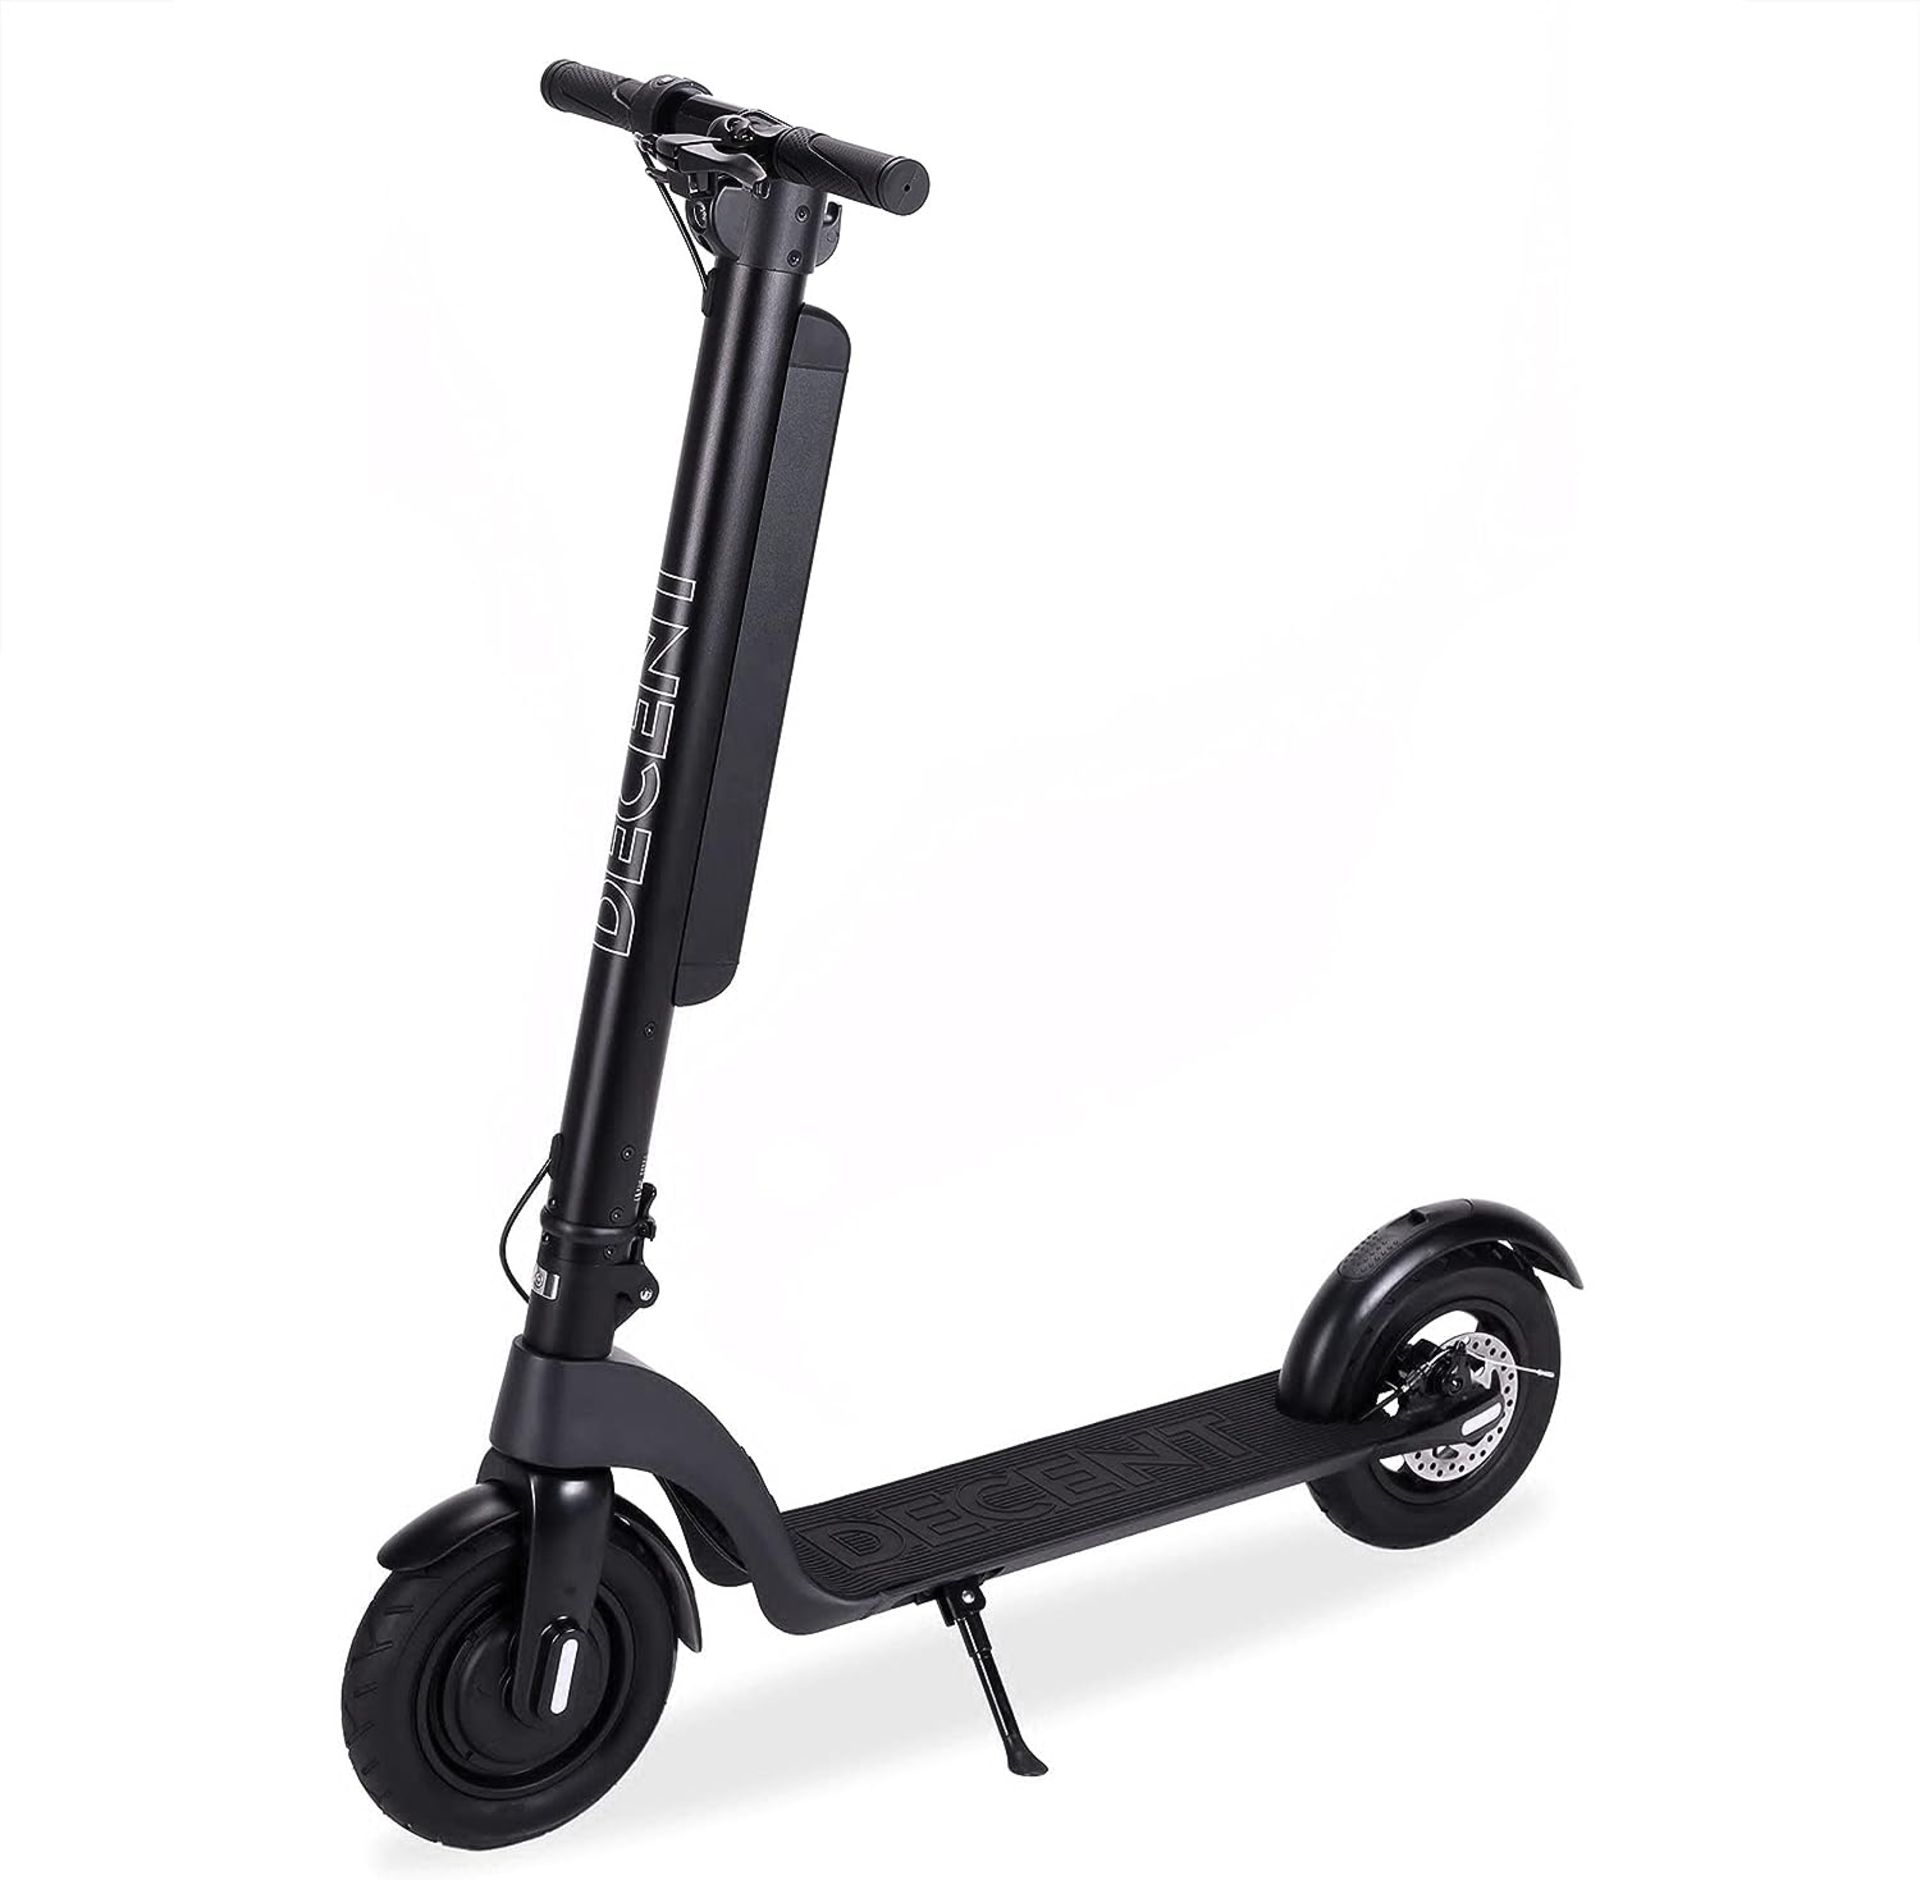 New &Boxed Decent One Electric Scooter - Black. RRP £699.99. The Decent One Max is powerful,